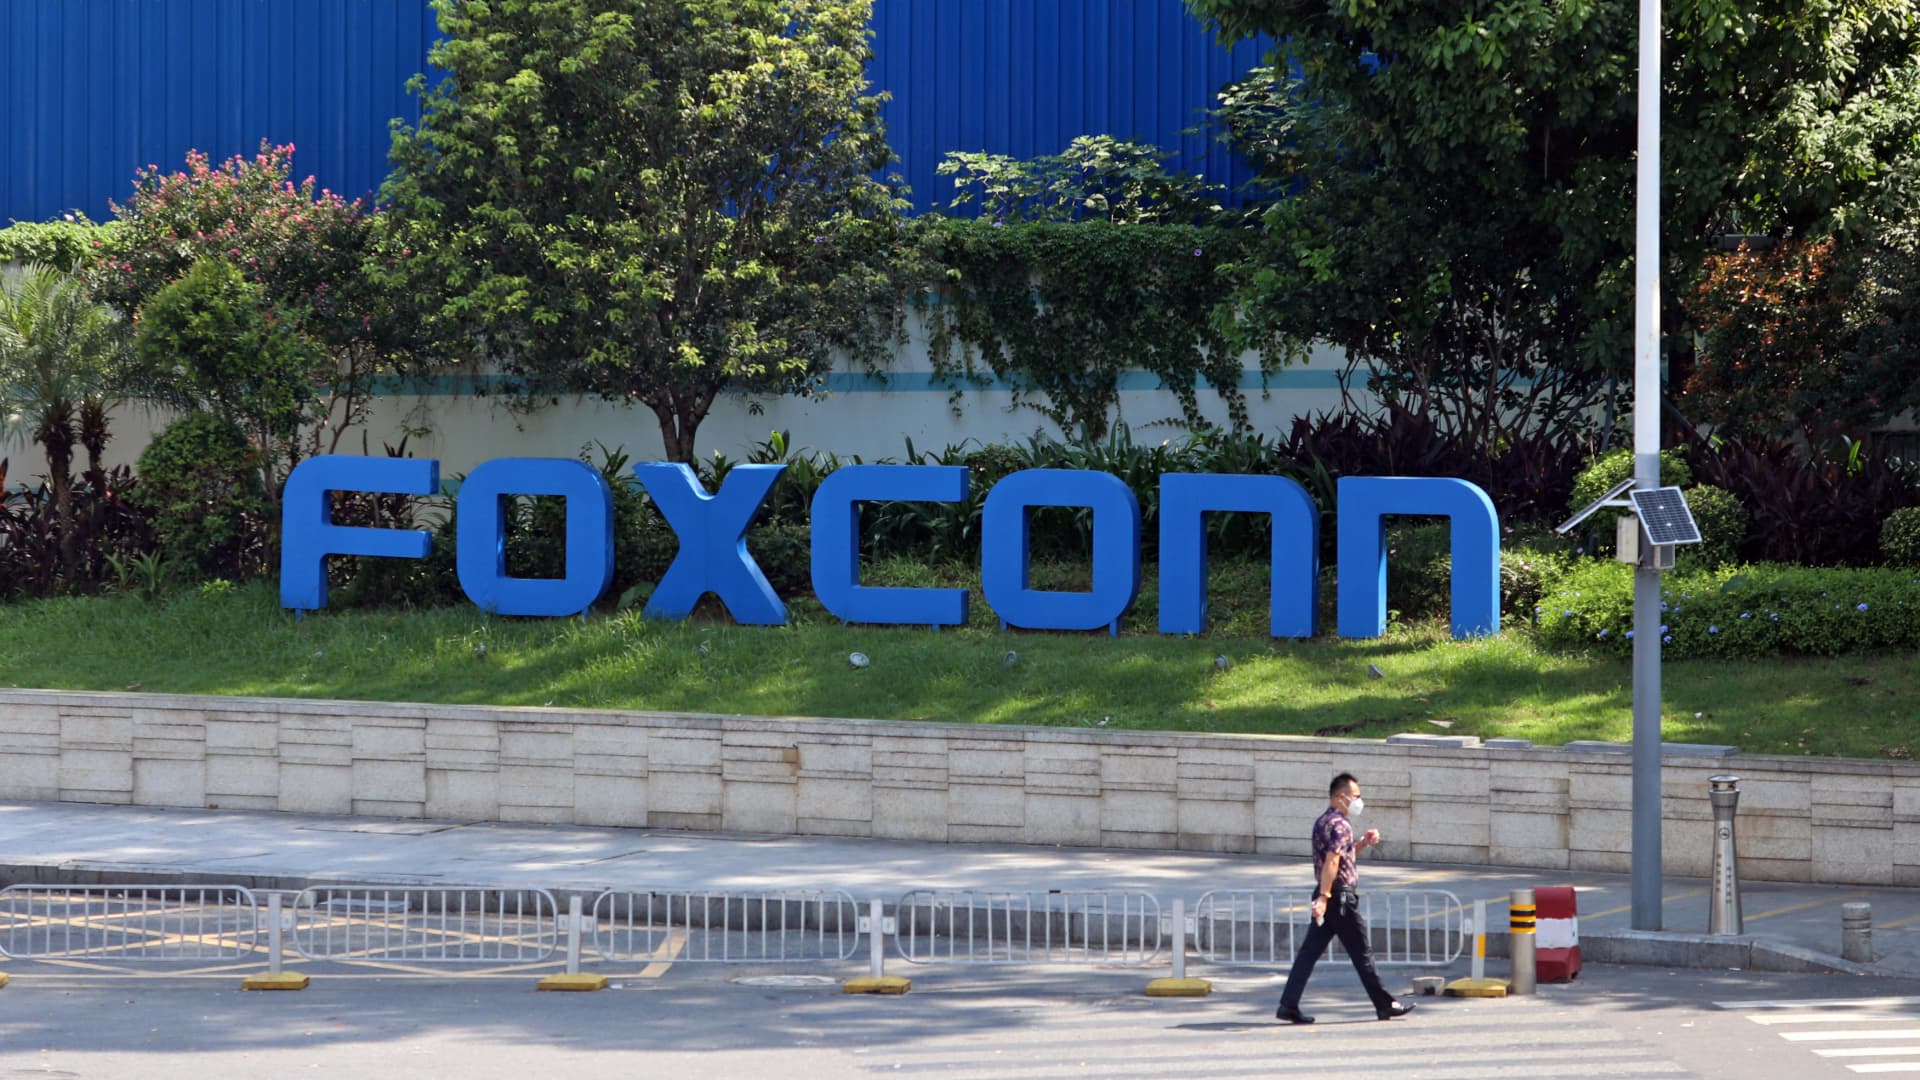 Massive Foxconn Apple iphone plant in China rocked by new worker unrest